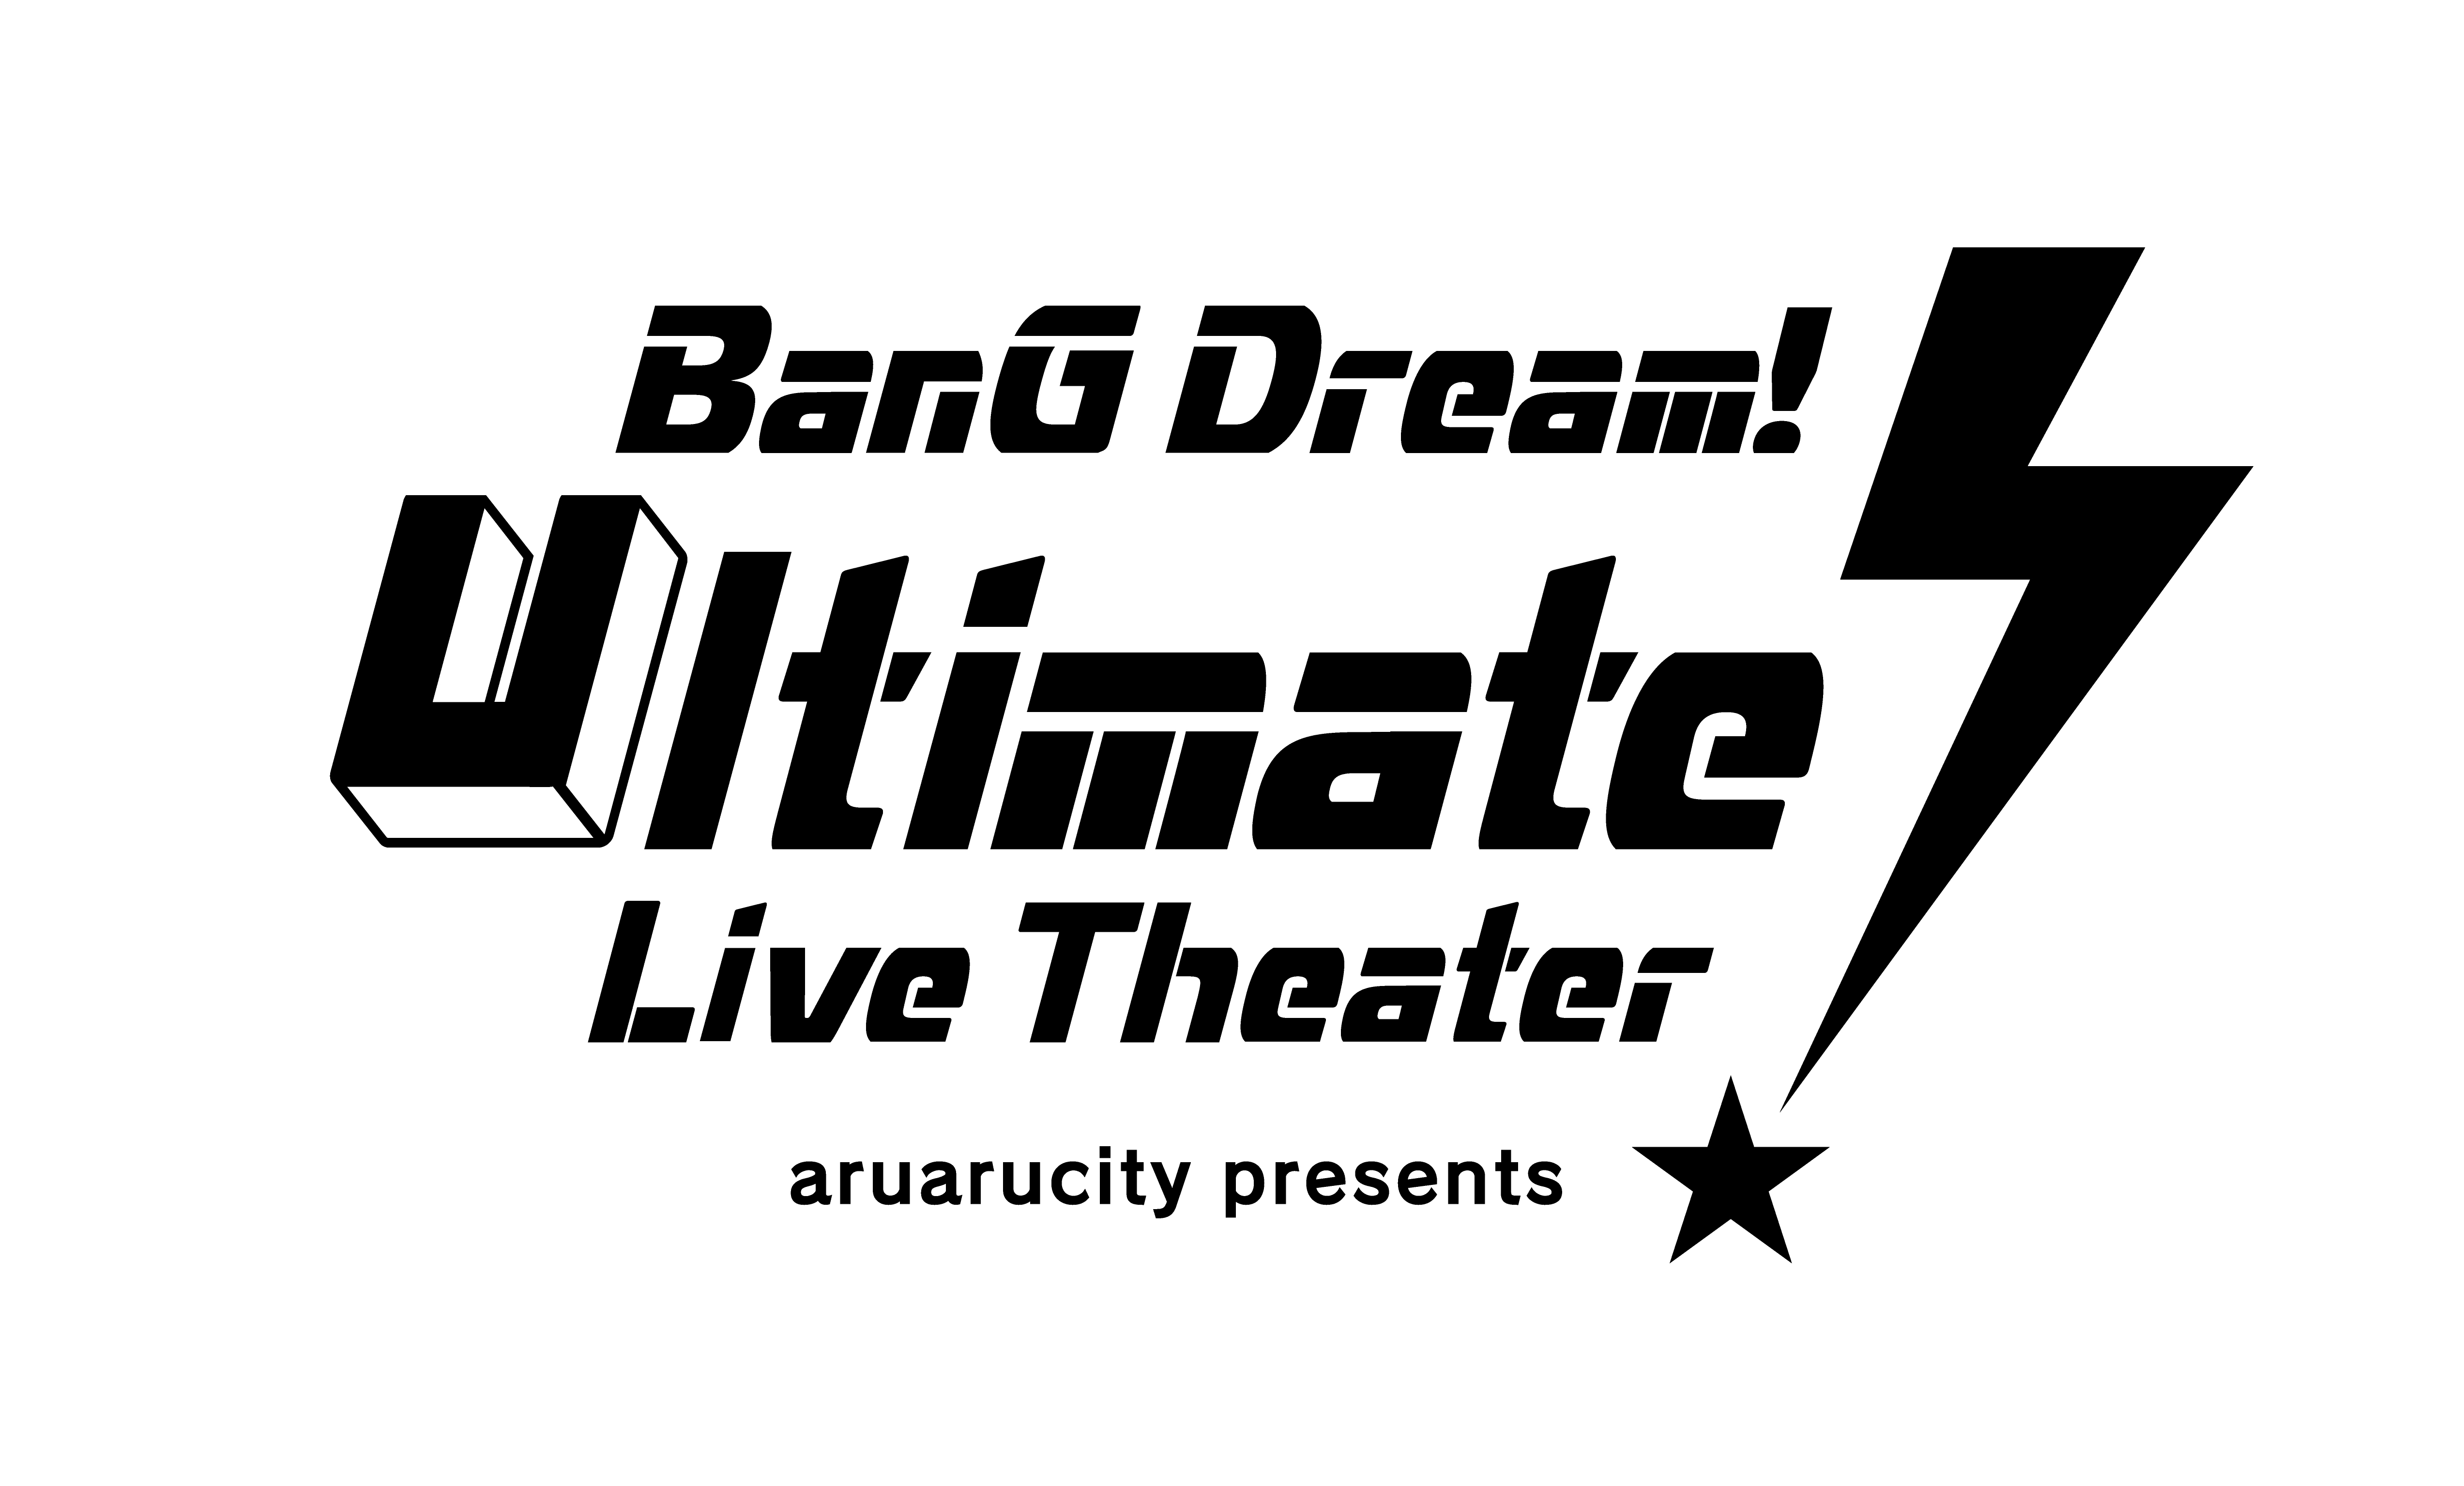 『BanG Dream! Ultimate Live Theater』ロゴ